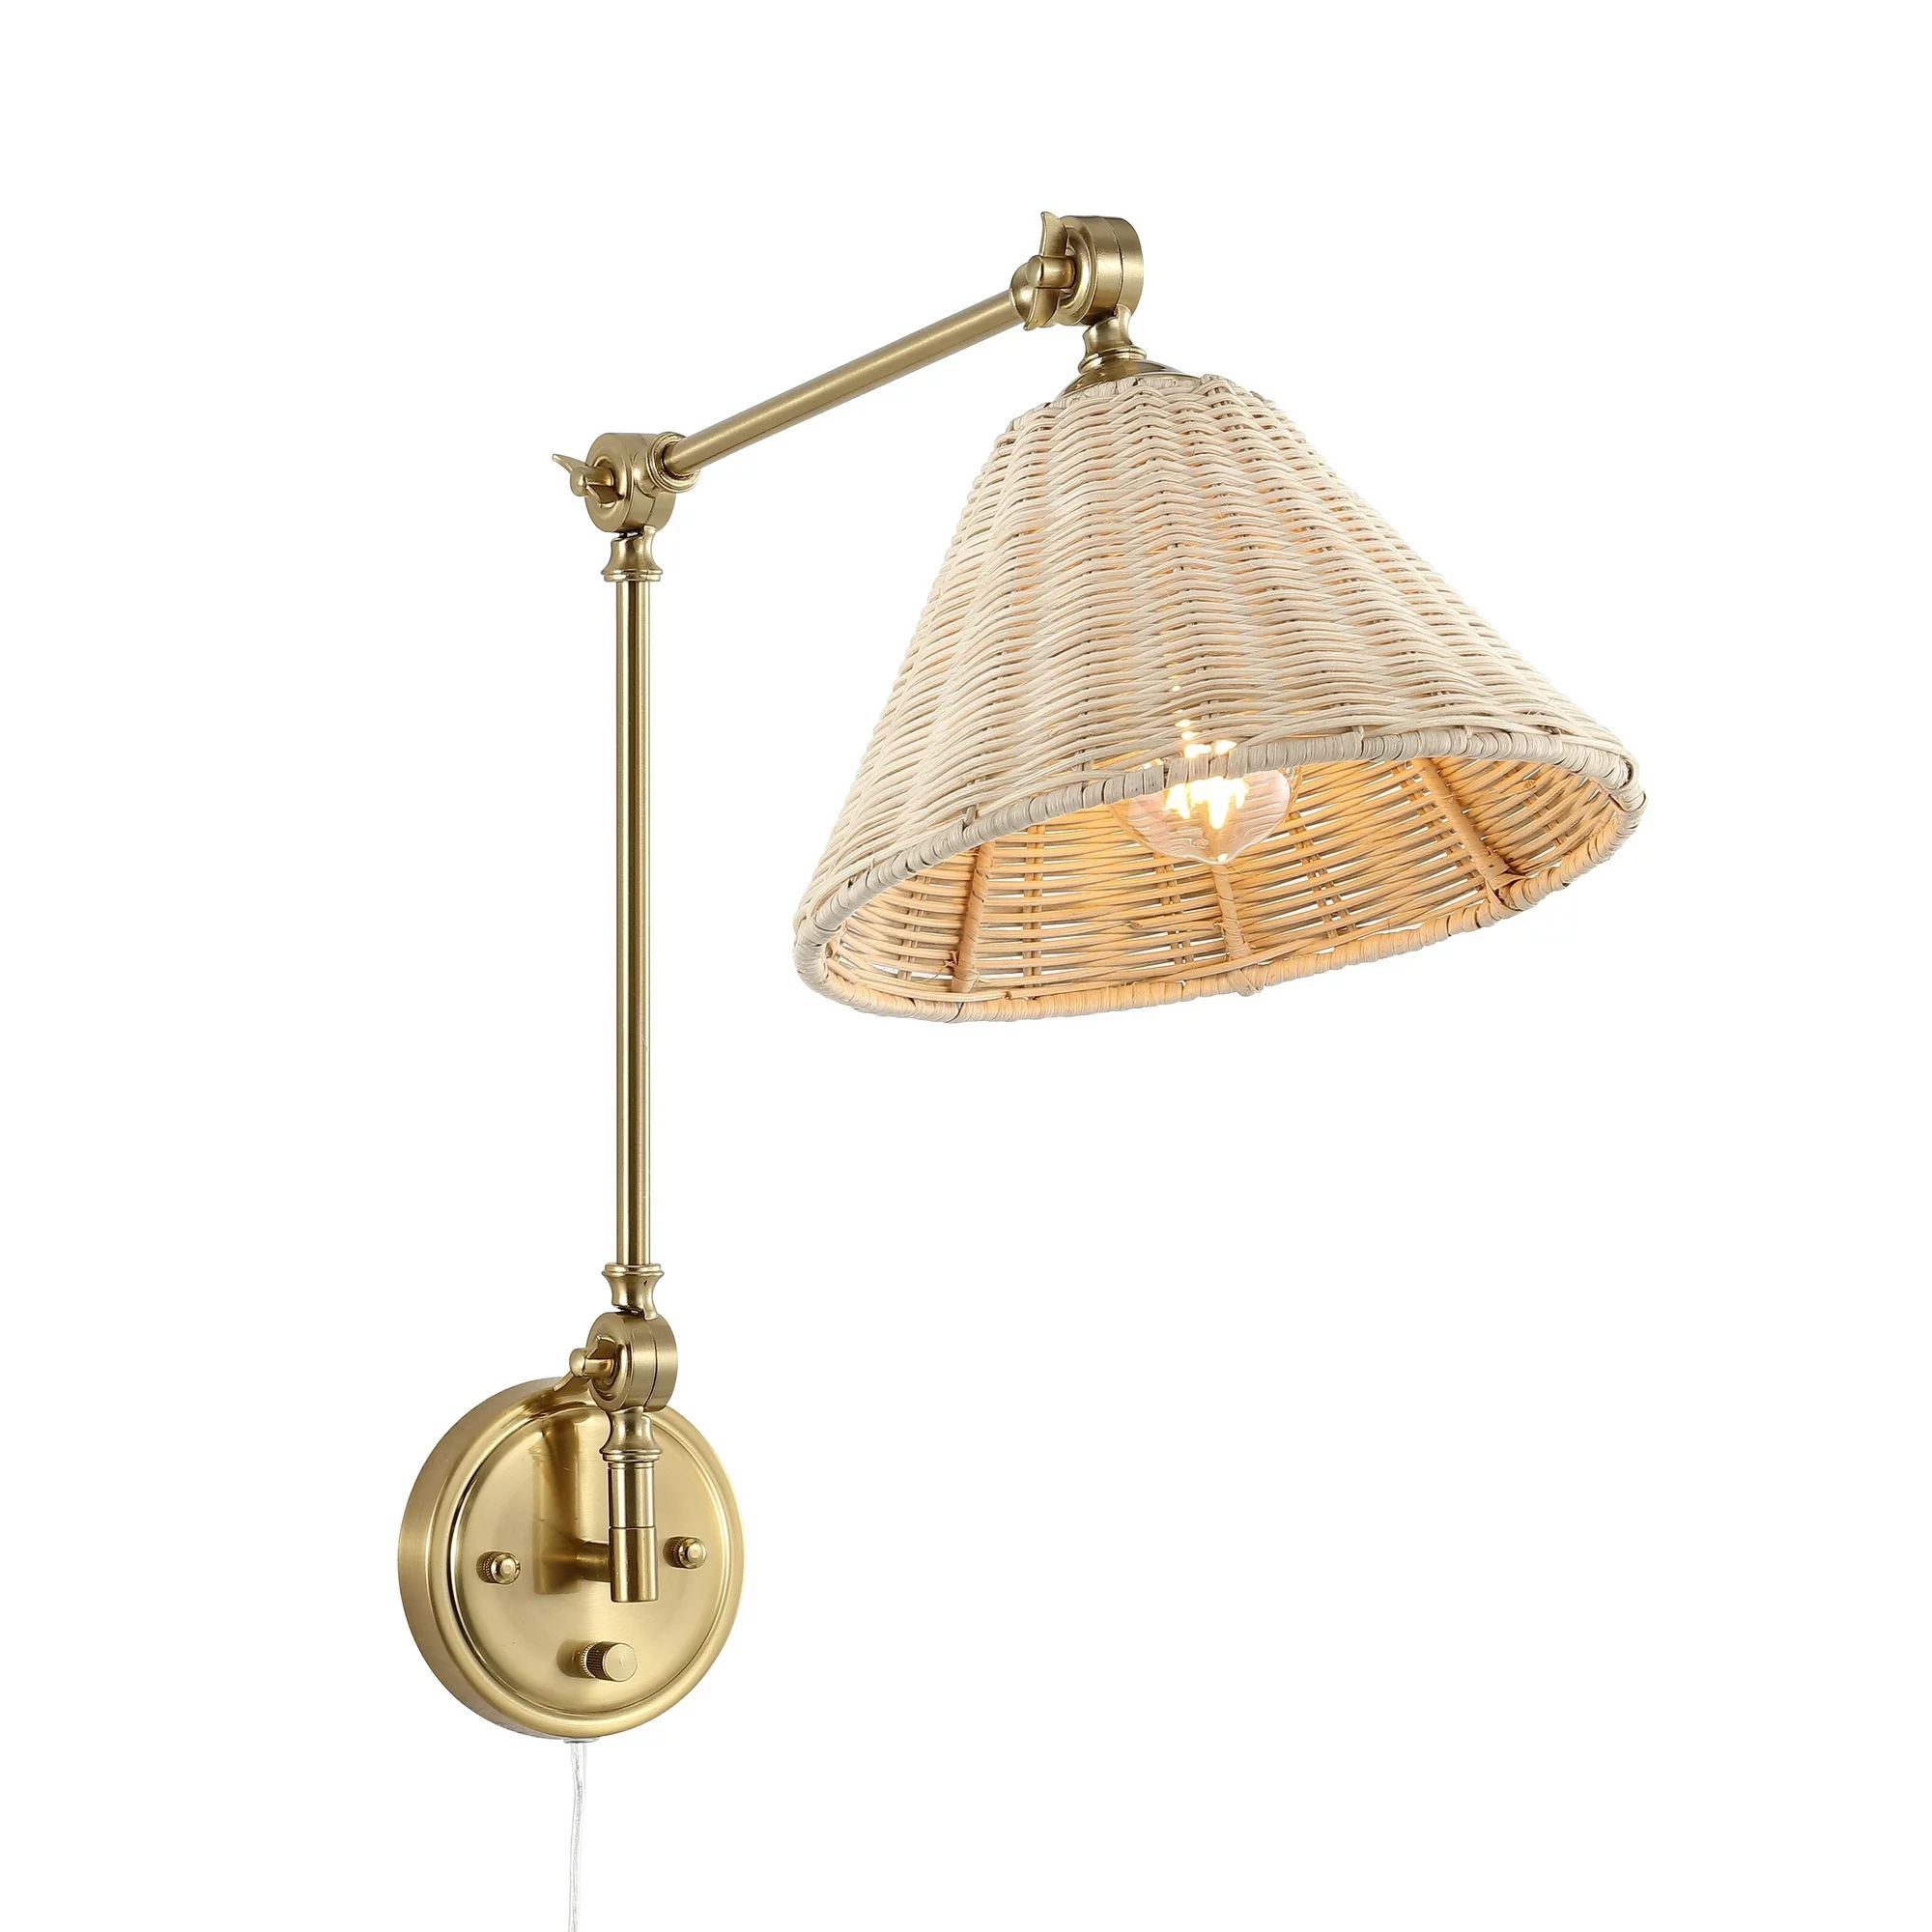 WINGBO Adjustable Swing Arm Wall Sconce with Neutral Beige Rattan Shades | Walmart (US)